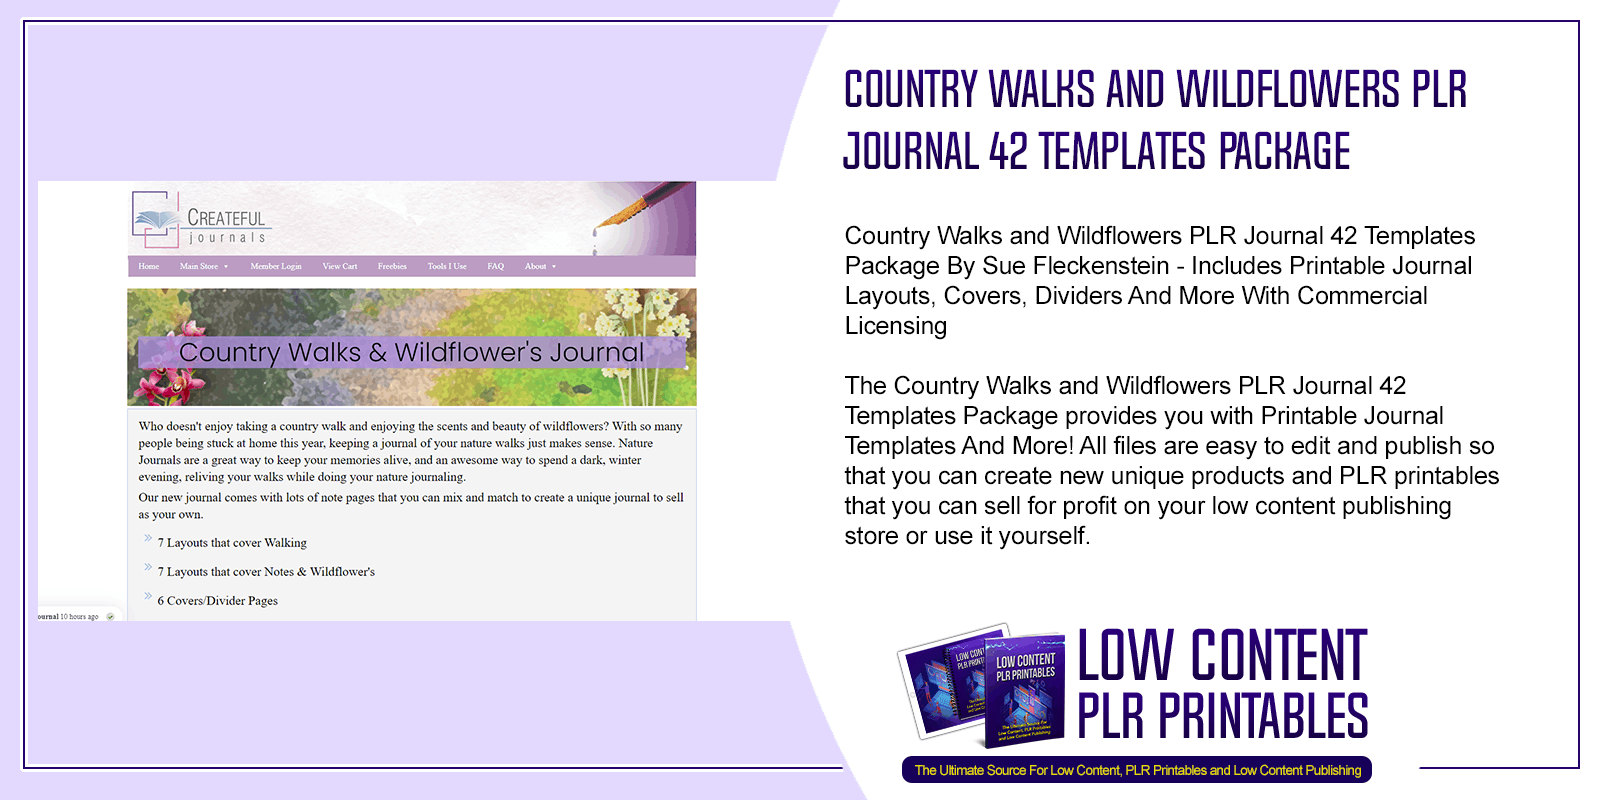 Country Walks and Wildflowers PLR Journal 42 Templates Package